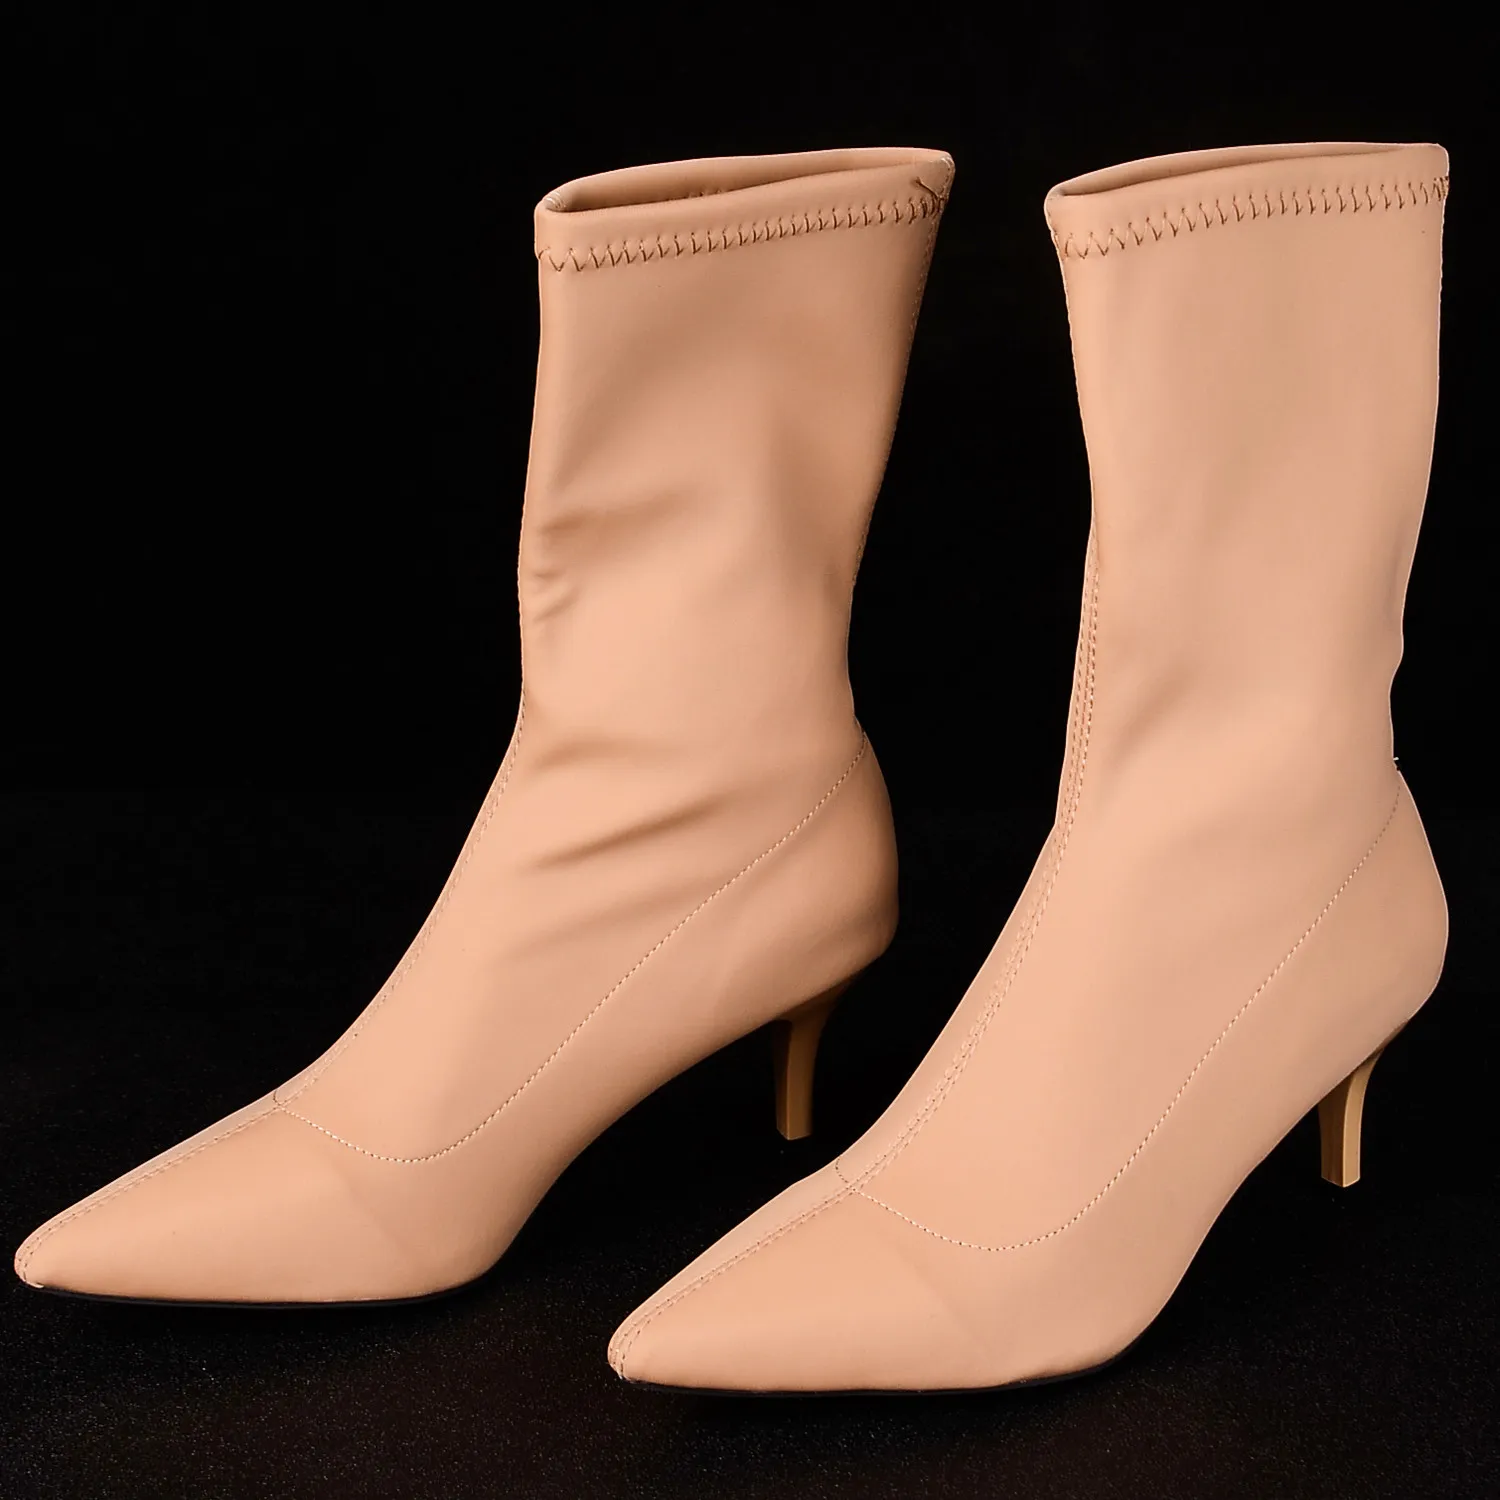 Black Beige Ankle Elastic Sock Boots Women Pointed Toe Thin Heel Boots Stretch Women Winter Shoes Sexy Booties Woman Y200115